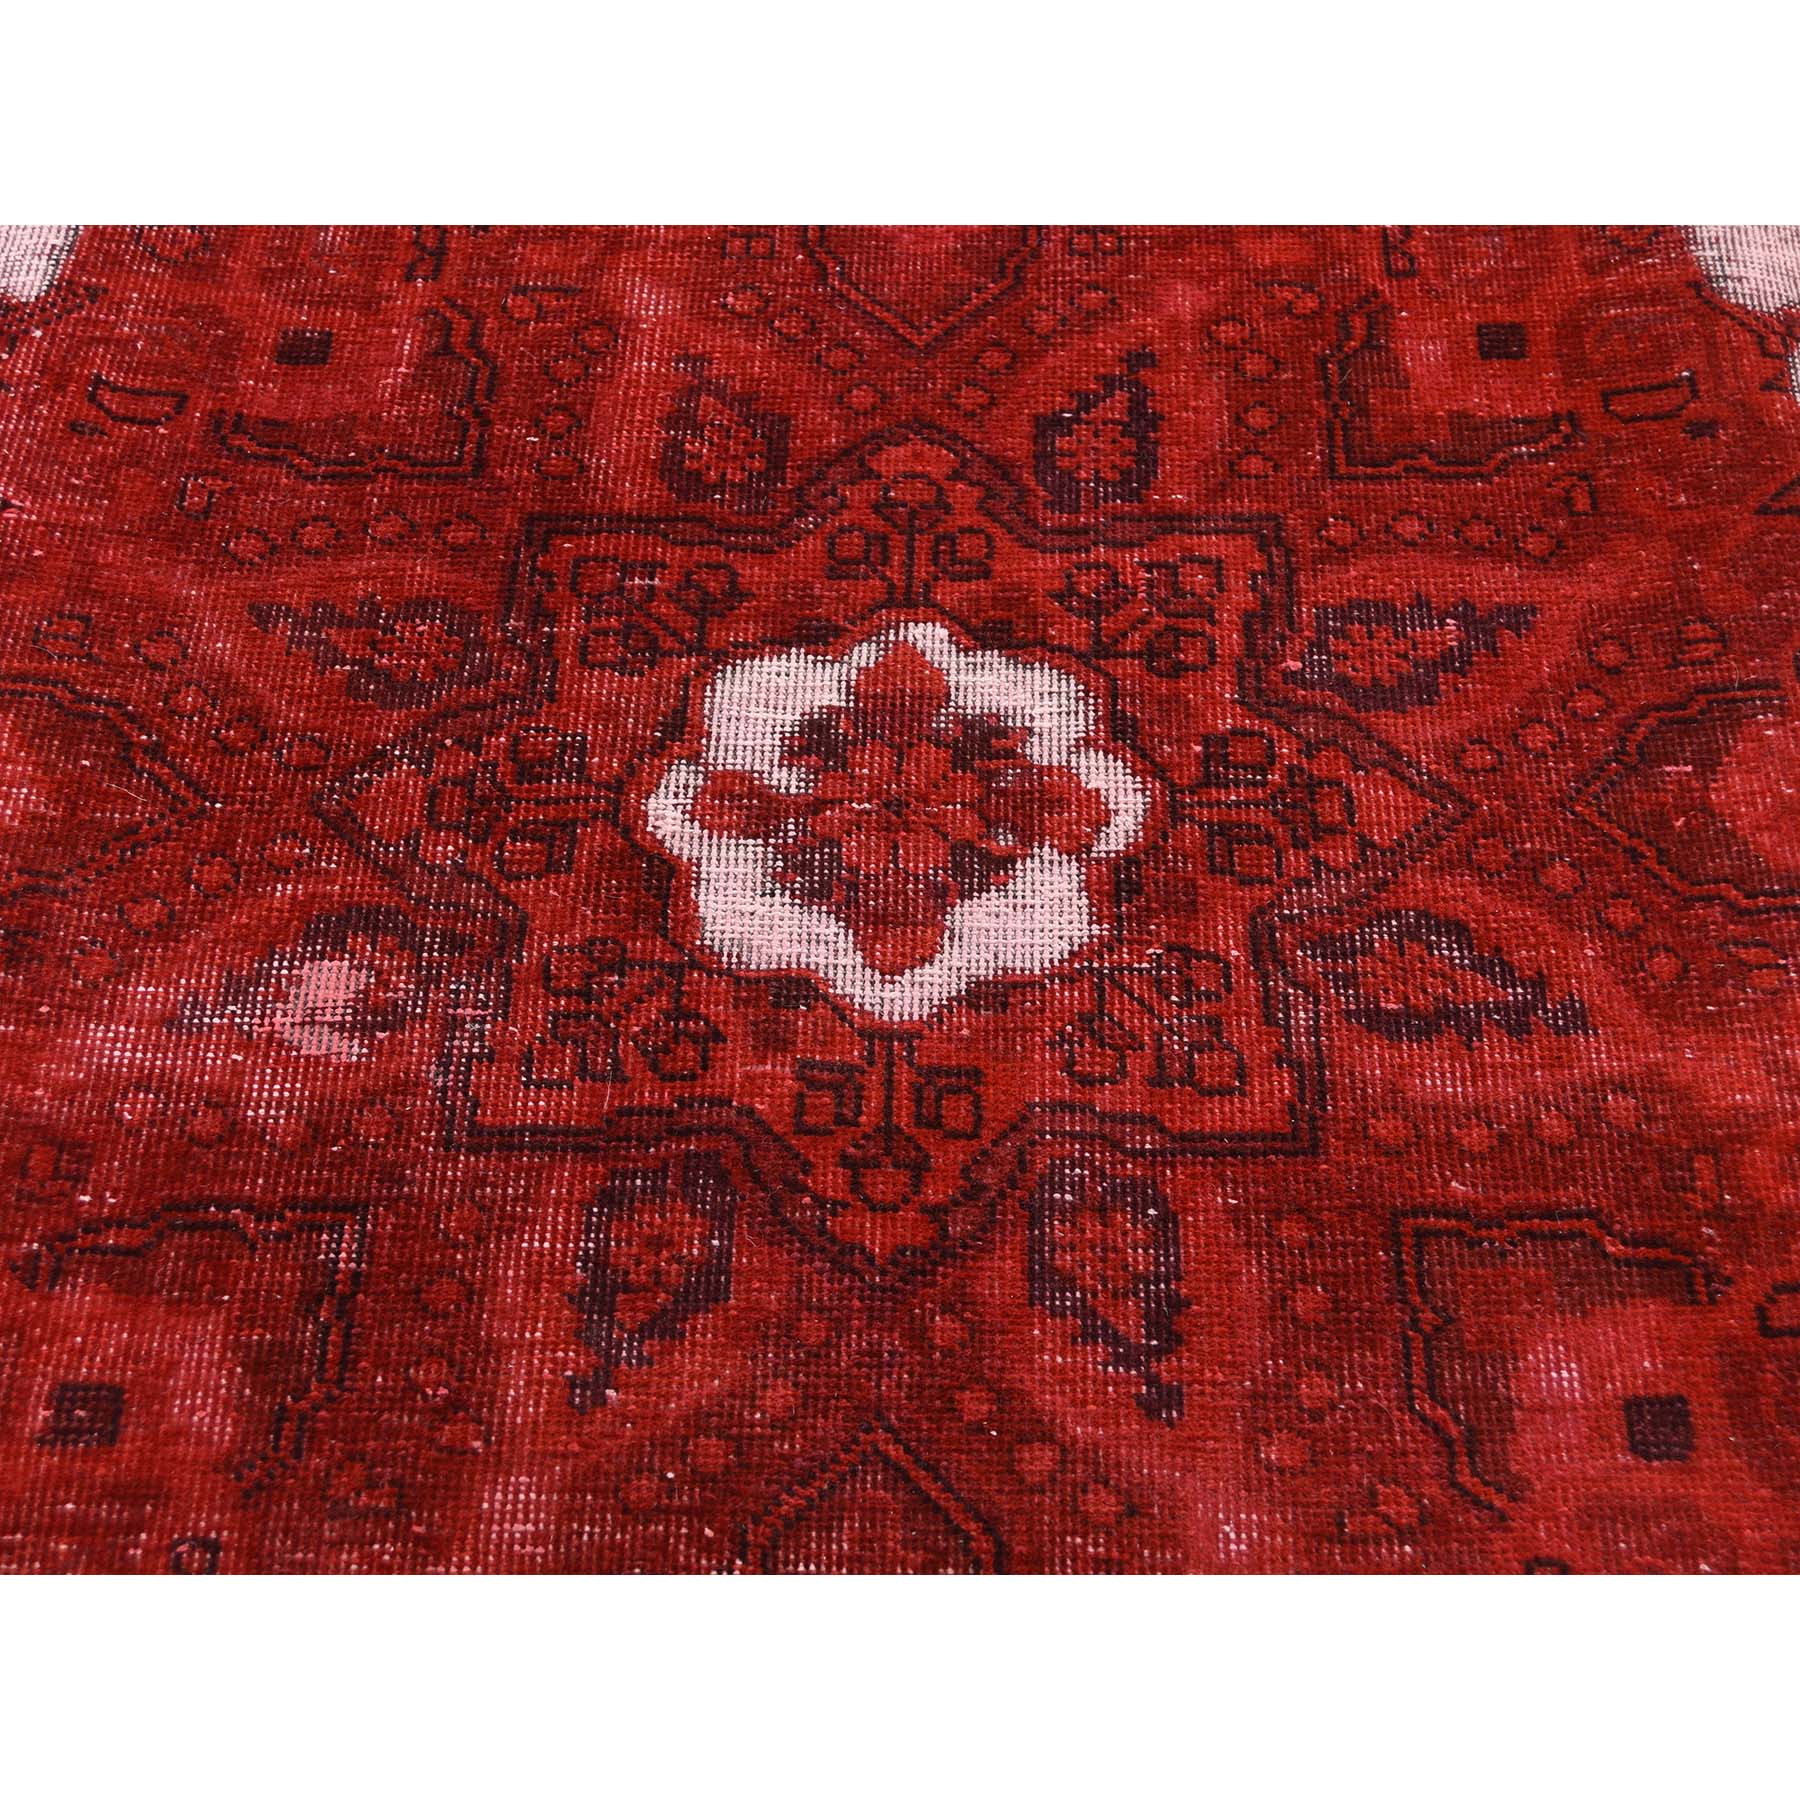 8-1 x11- Red Overdyed Persian Tabriz Hi-low Vintage Pure Wool Hand-Knotted Oriental Rug 